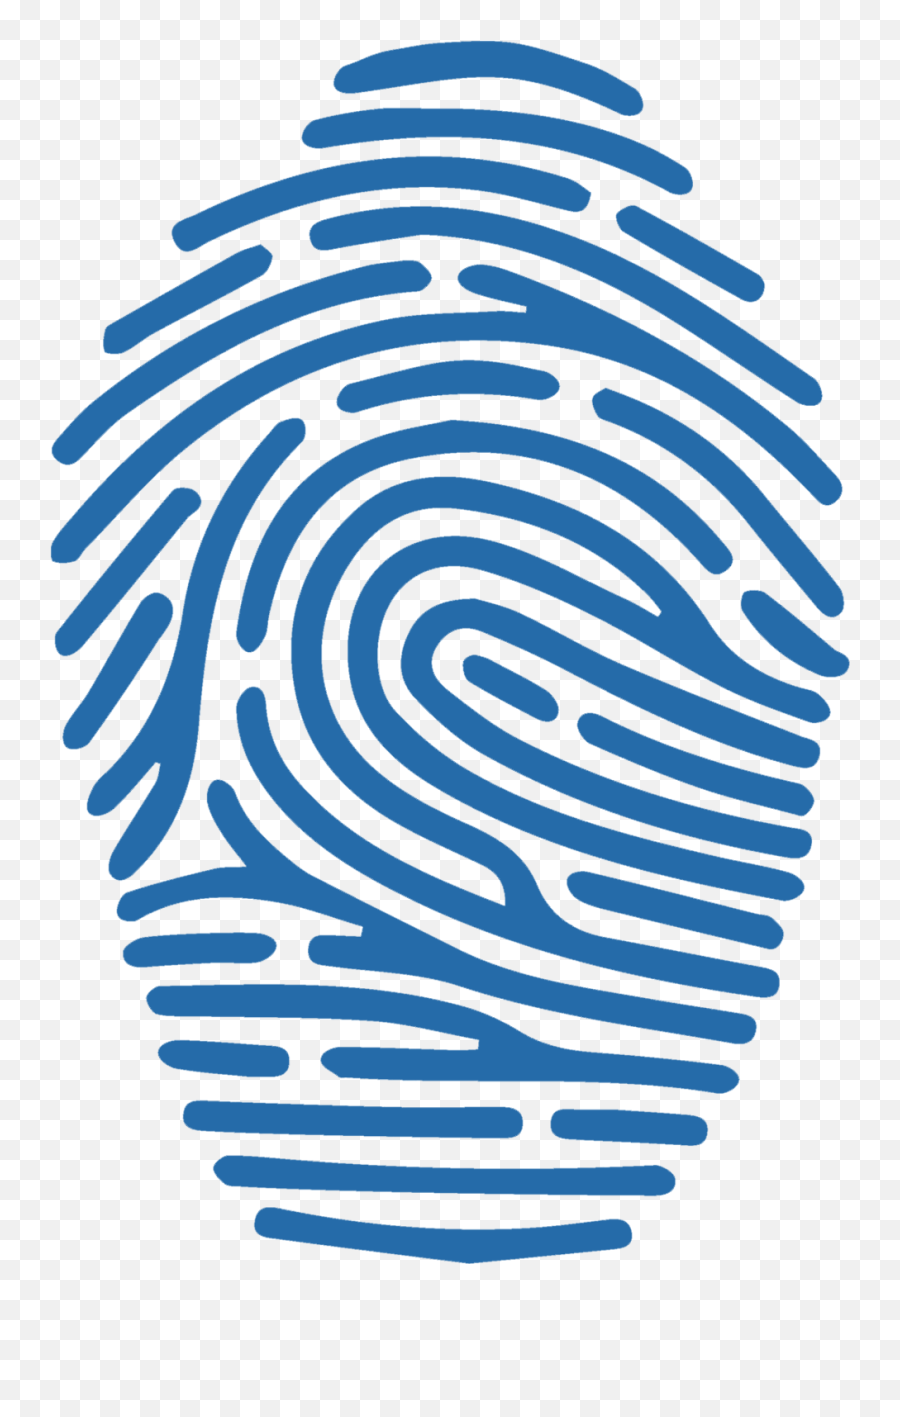 Event Planners - Inevent Fingerprint Silhouette Png,Event Planner Icon